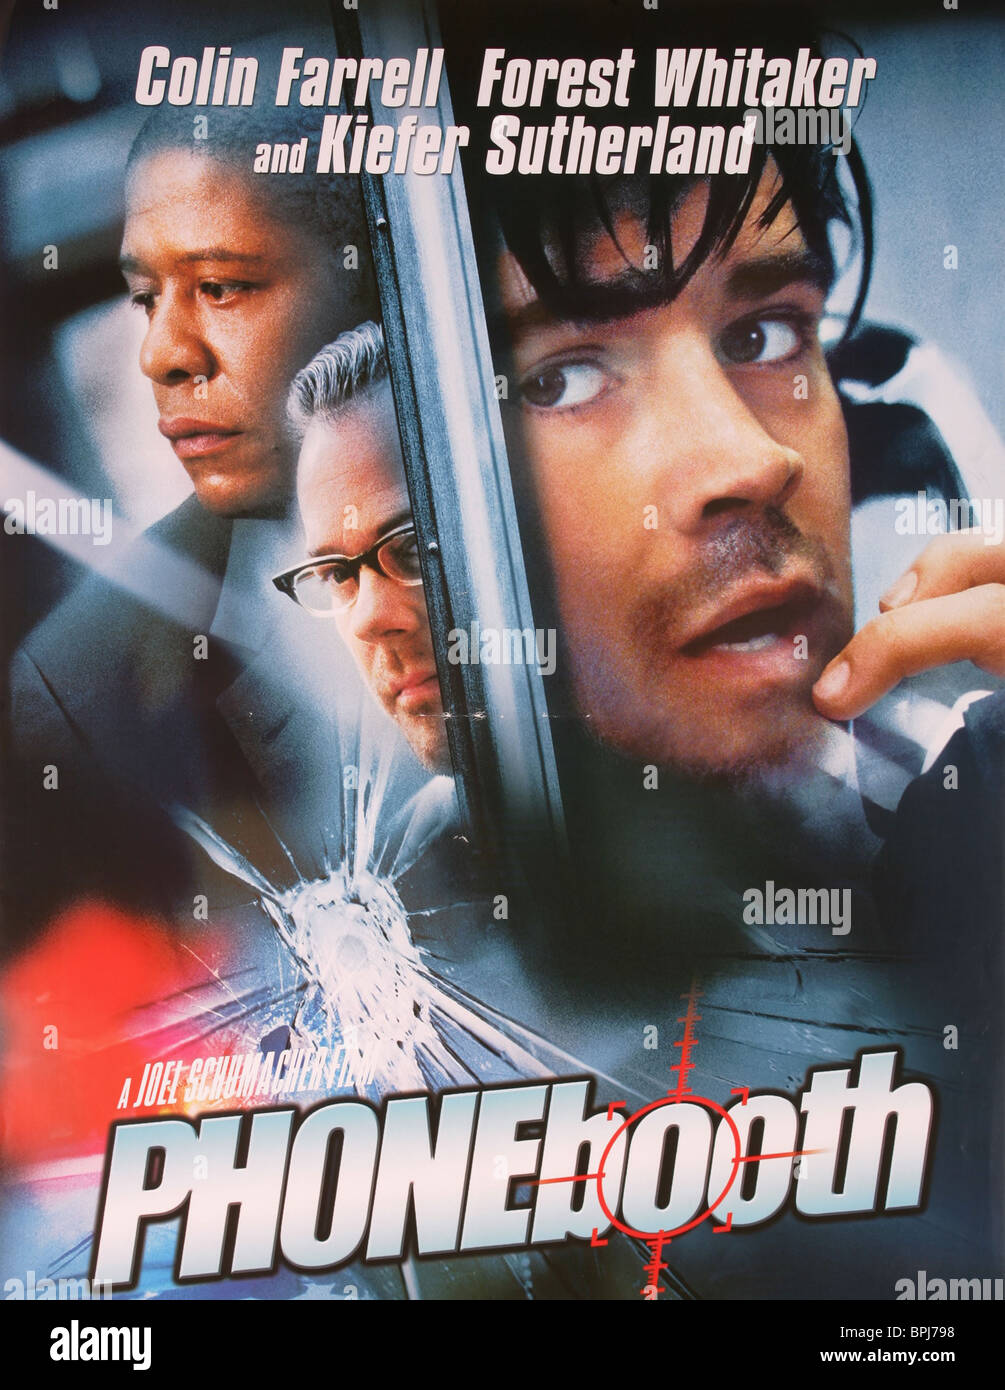 KIEFER SUTHERLAND, FOREST WHITAKER, COLIN FARRELL, PHONE BOOTH ...